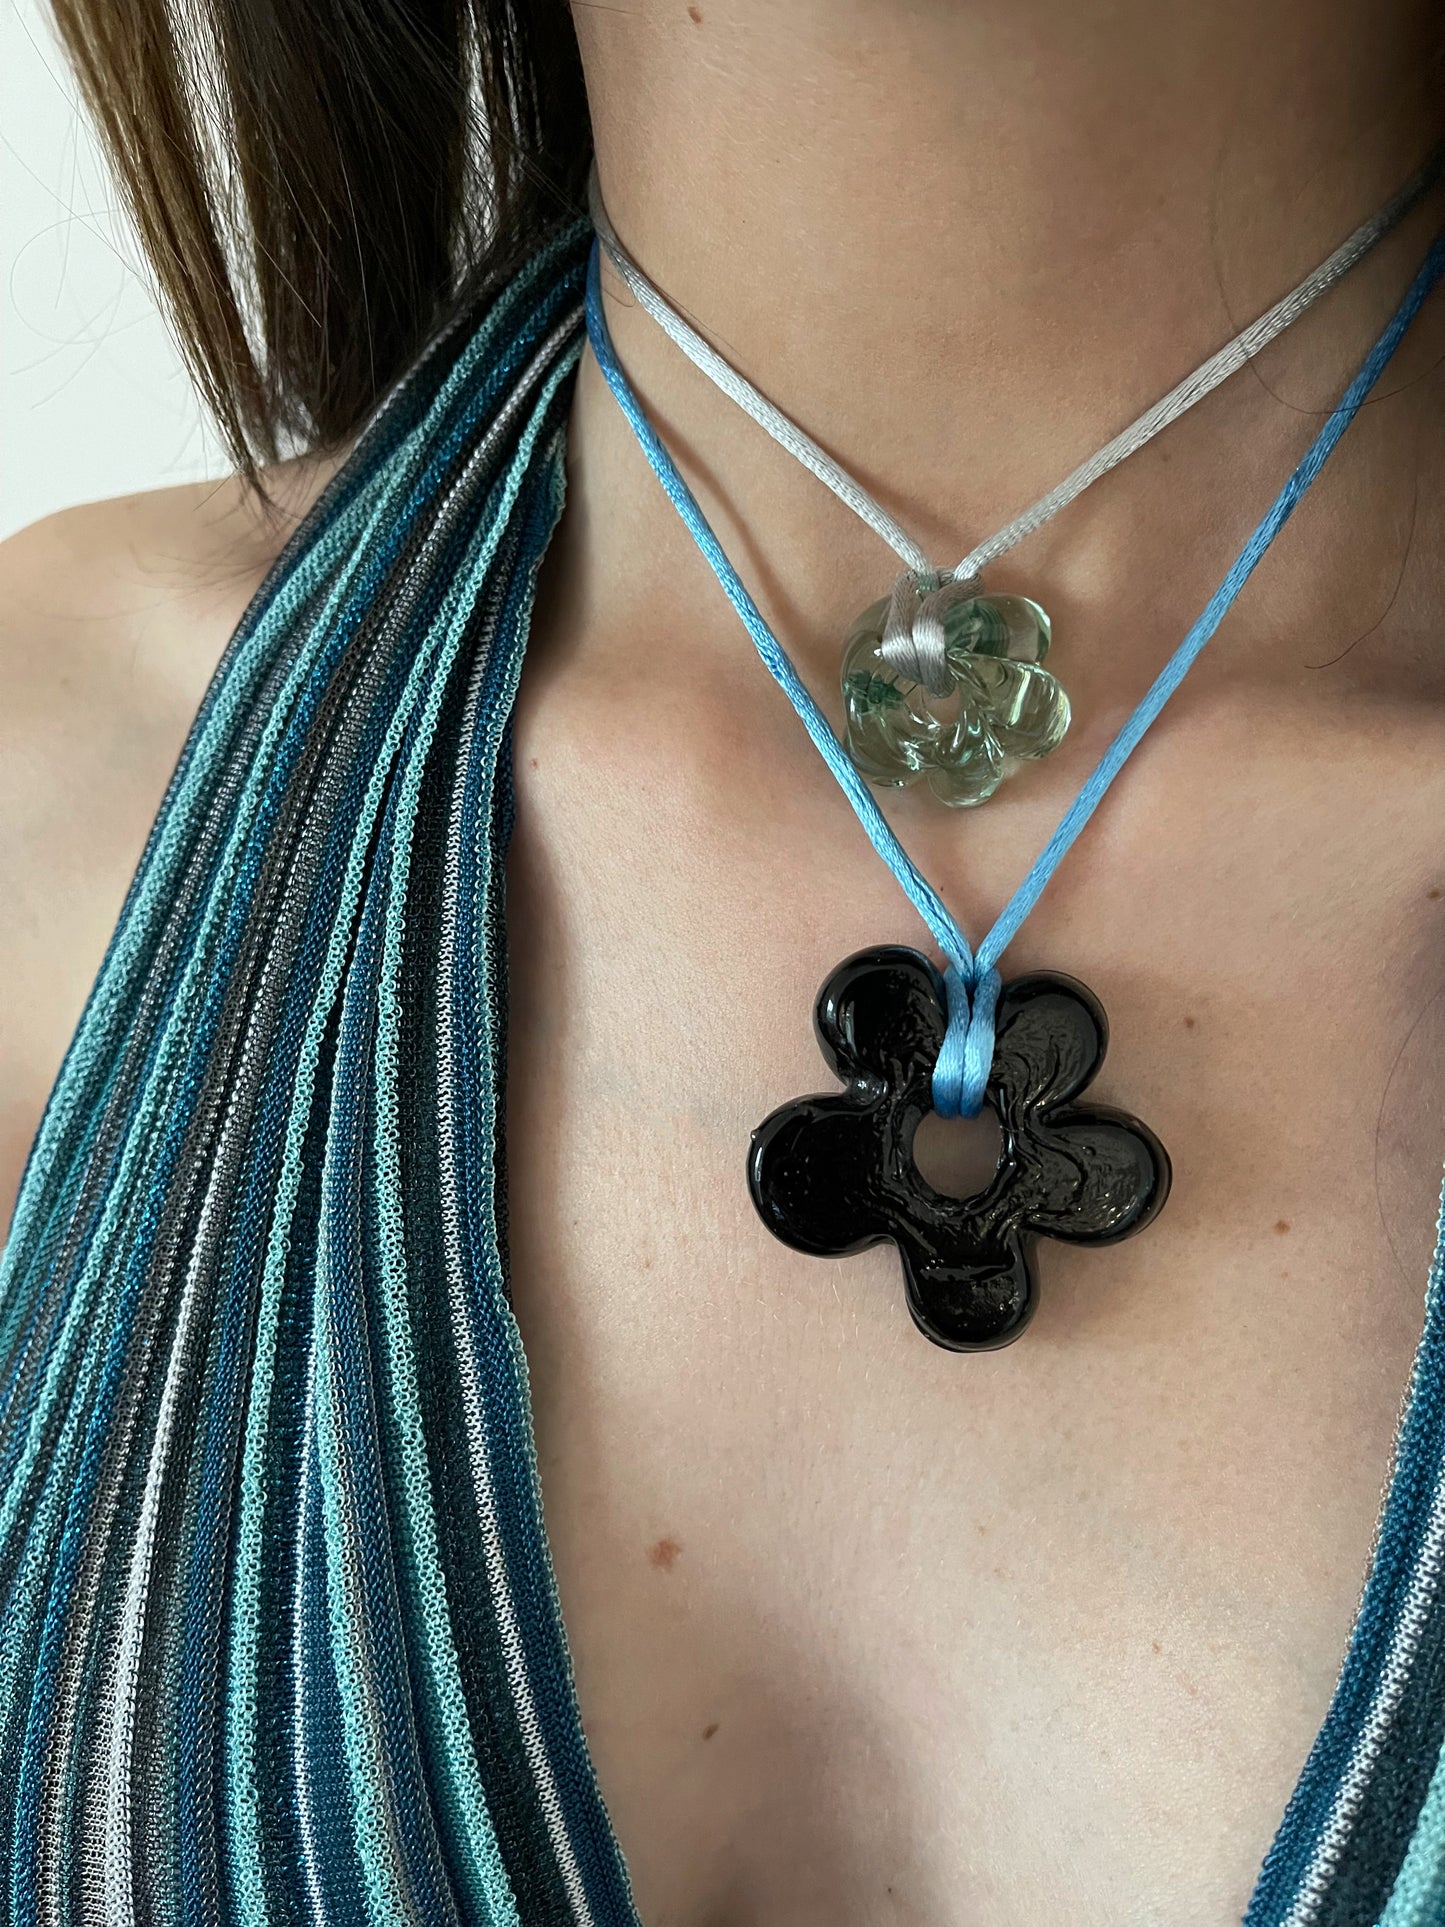 CRYSTAL TRANSPARENT JELLY with grey cord & LARGE BLACK FLOWER with aqua cord